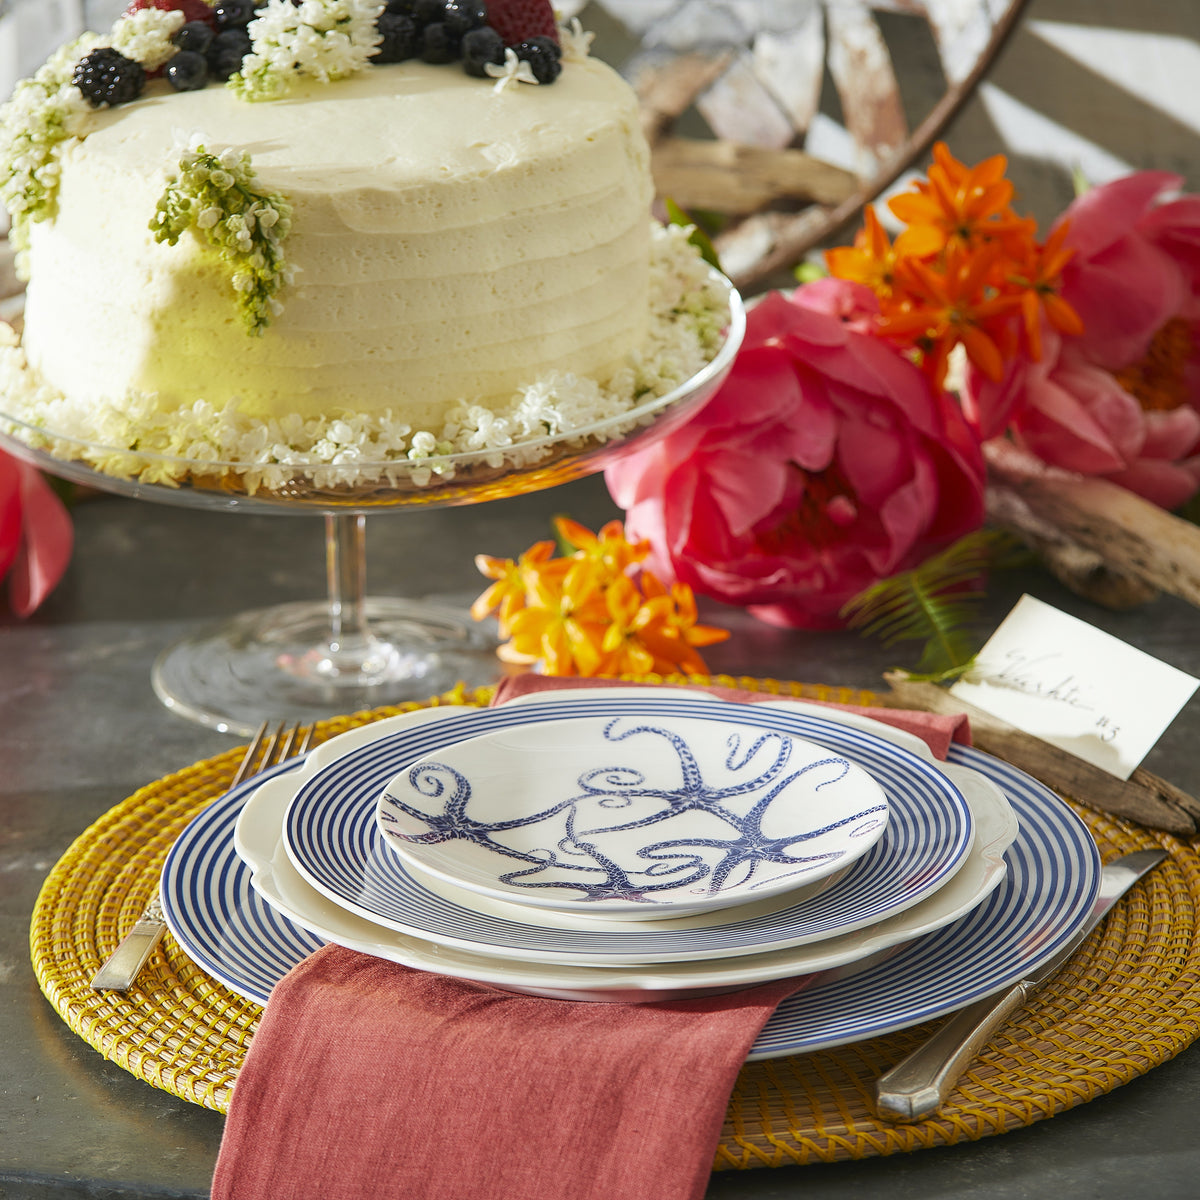 A decorated cake on a stand next to a place setting with a red napkin under layered Starfish Small Plates by Caskata Artisanal Home on a yellow placemat. Bright orange and pink flowers surround the setup, adding a touch of elegance with heirloom-quality dinnerware.